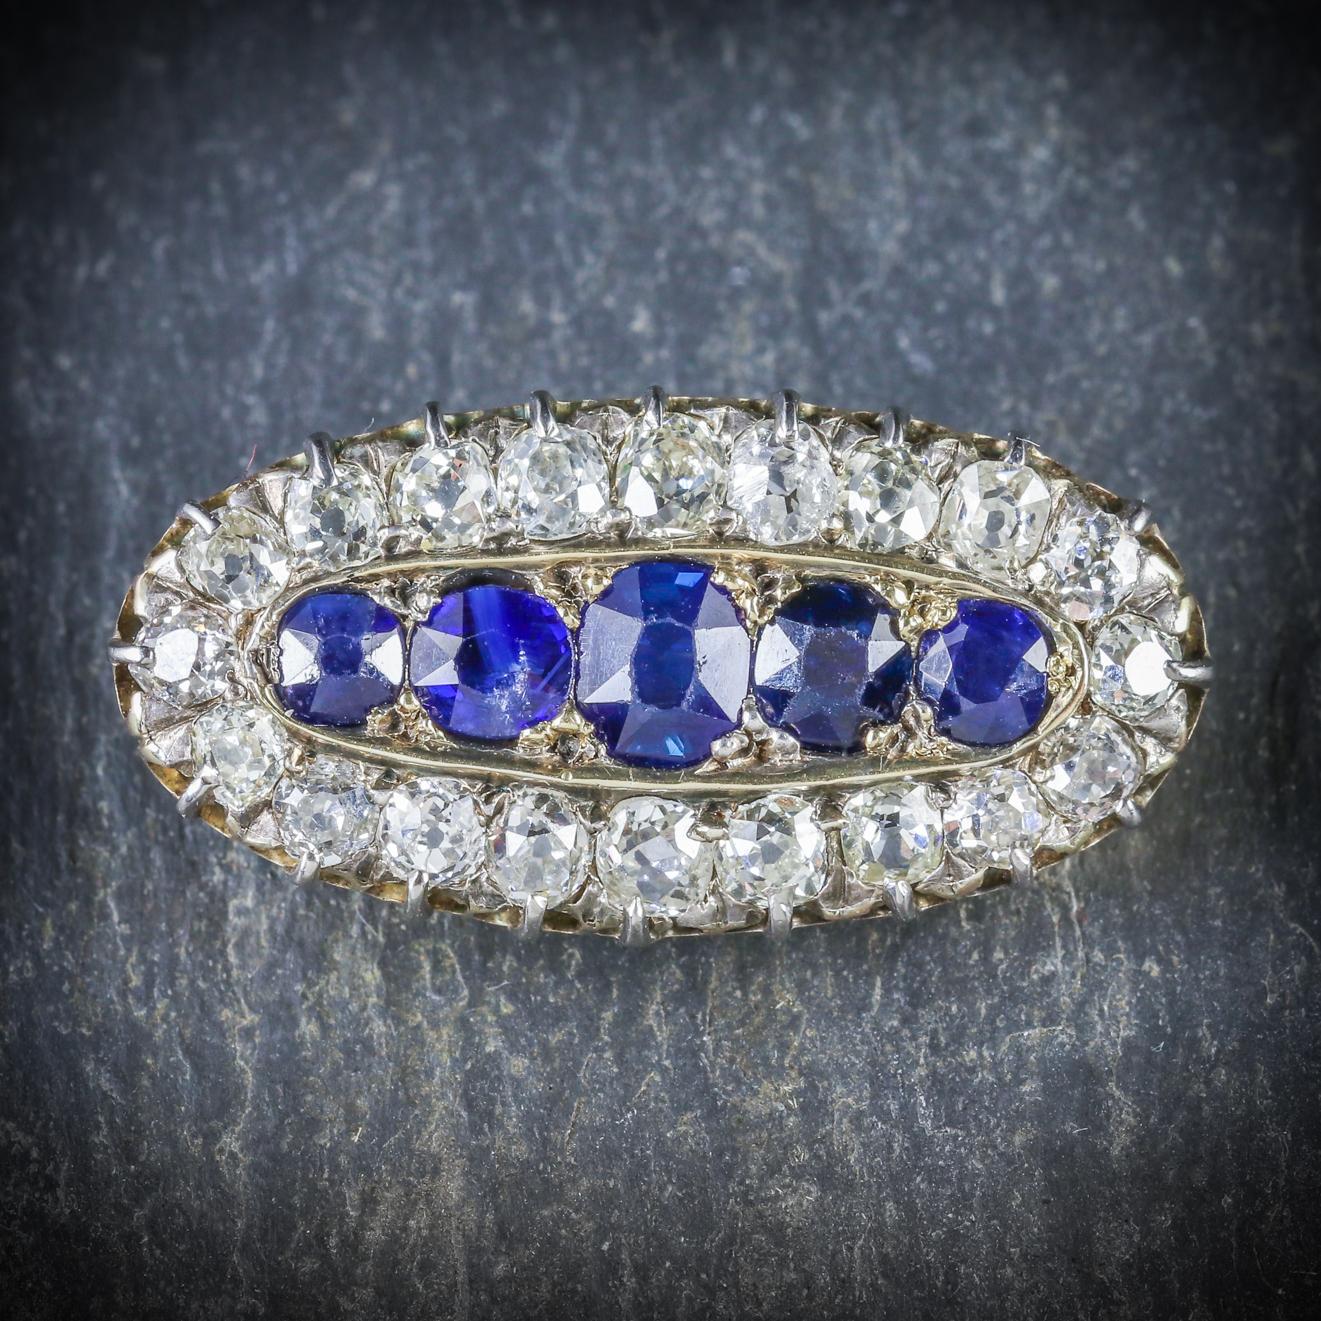 A stunning antique Sapphire and Diamond brooch from the Georgian era, Circa 1800

The wonderful oval gallery displays five deep blue Sapphires making up 1.3cts in total

A halo of sparkling old cut Diamonds borders the brooch with a total of 1.5cts